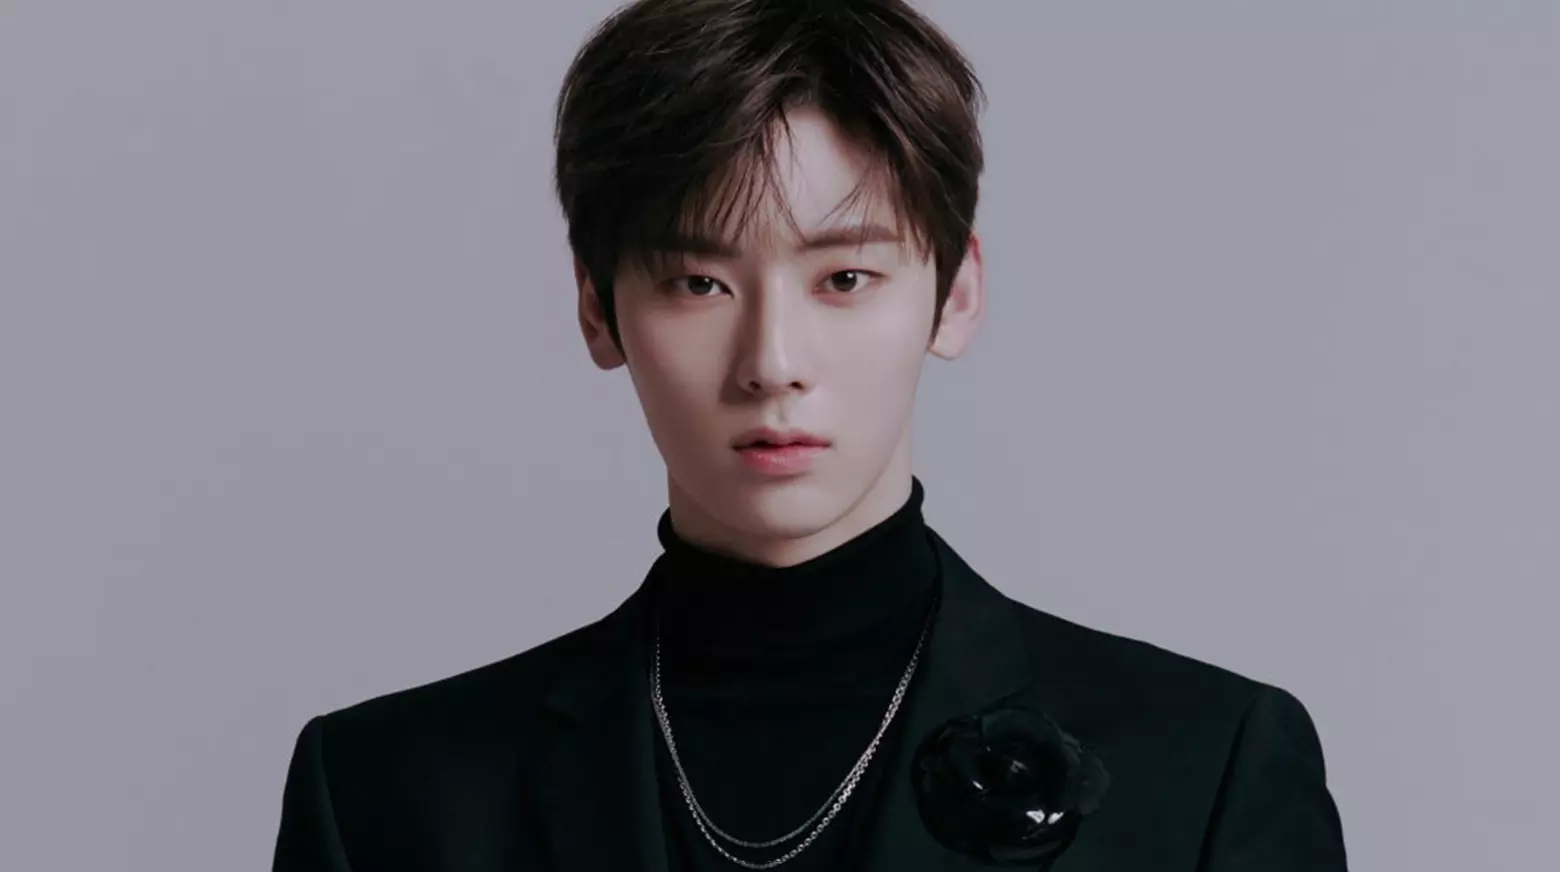 Who is Hwang Min Hyun? 5 facts to know about the South Korean idol-actor.